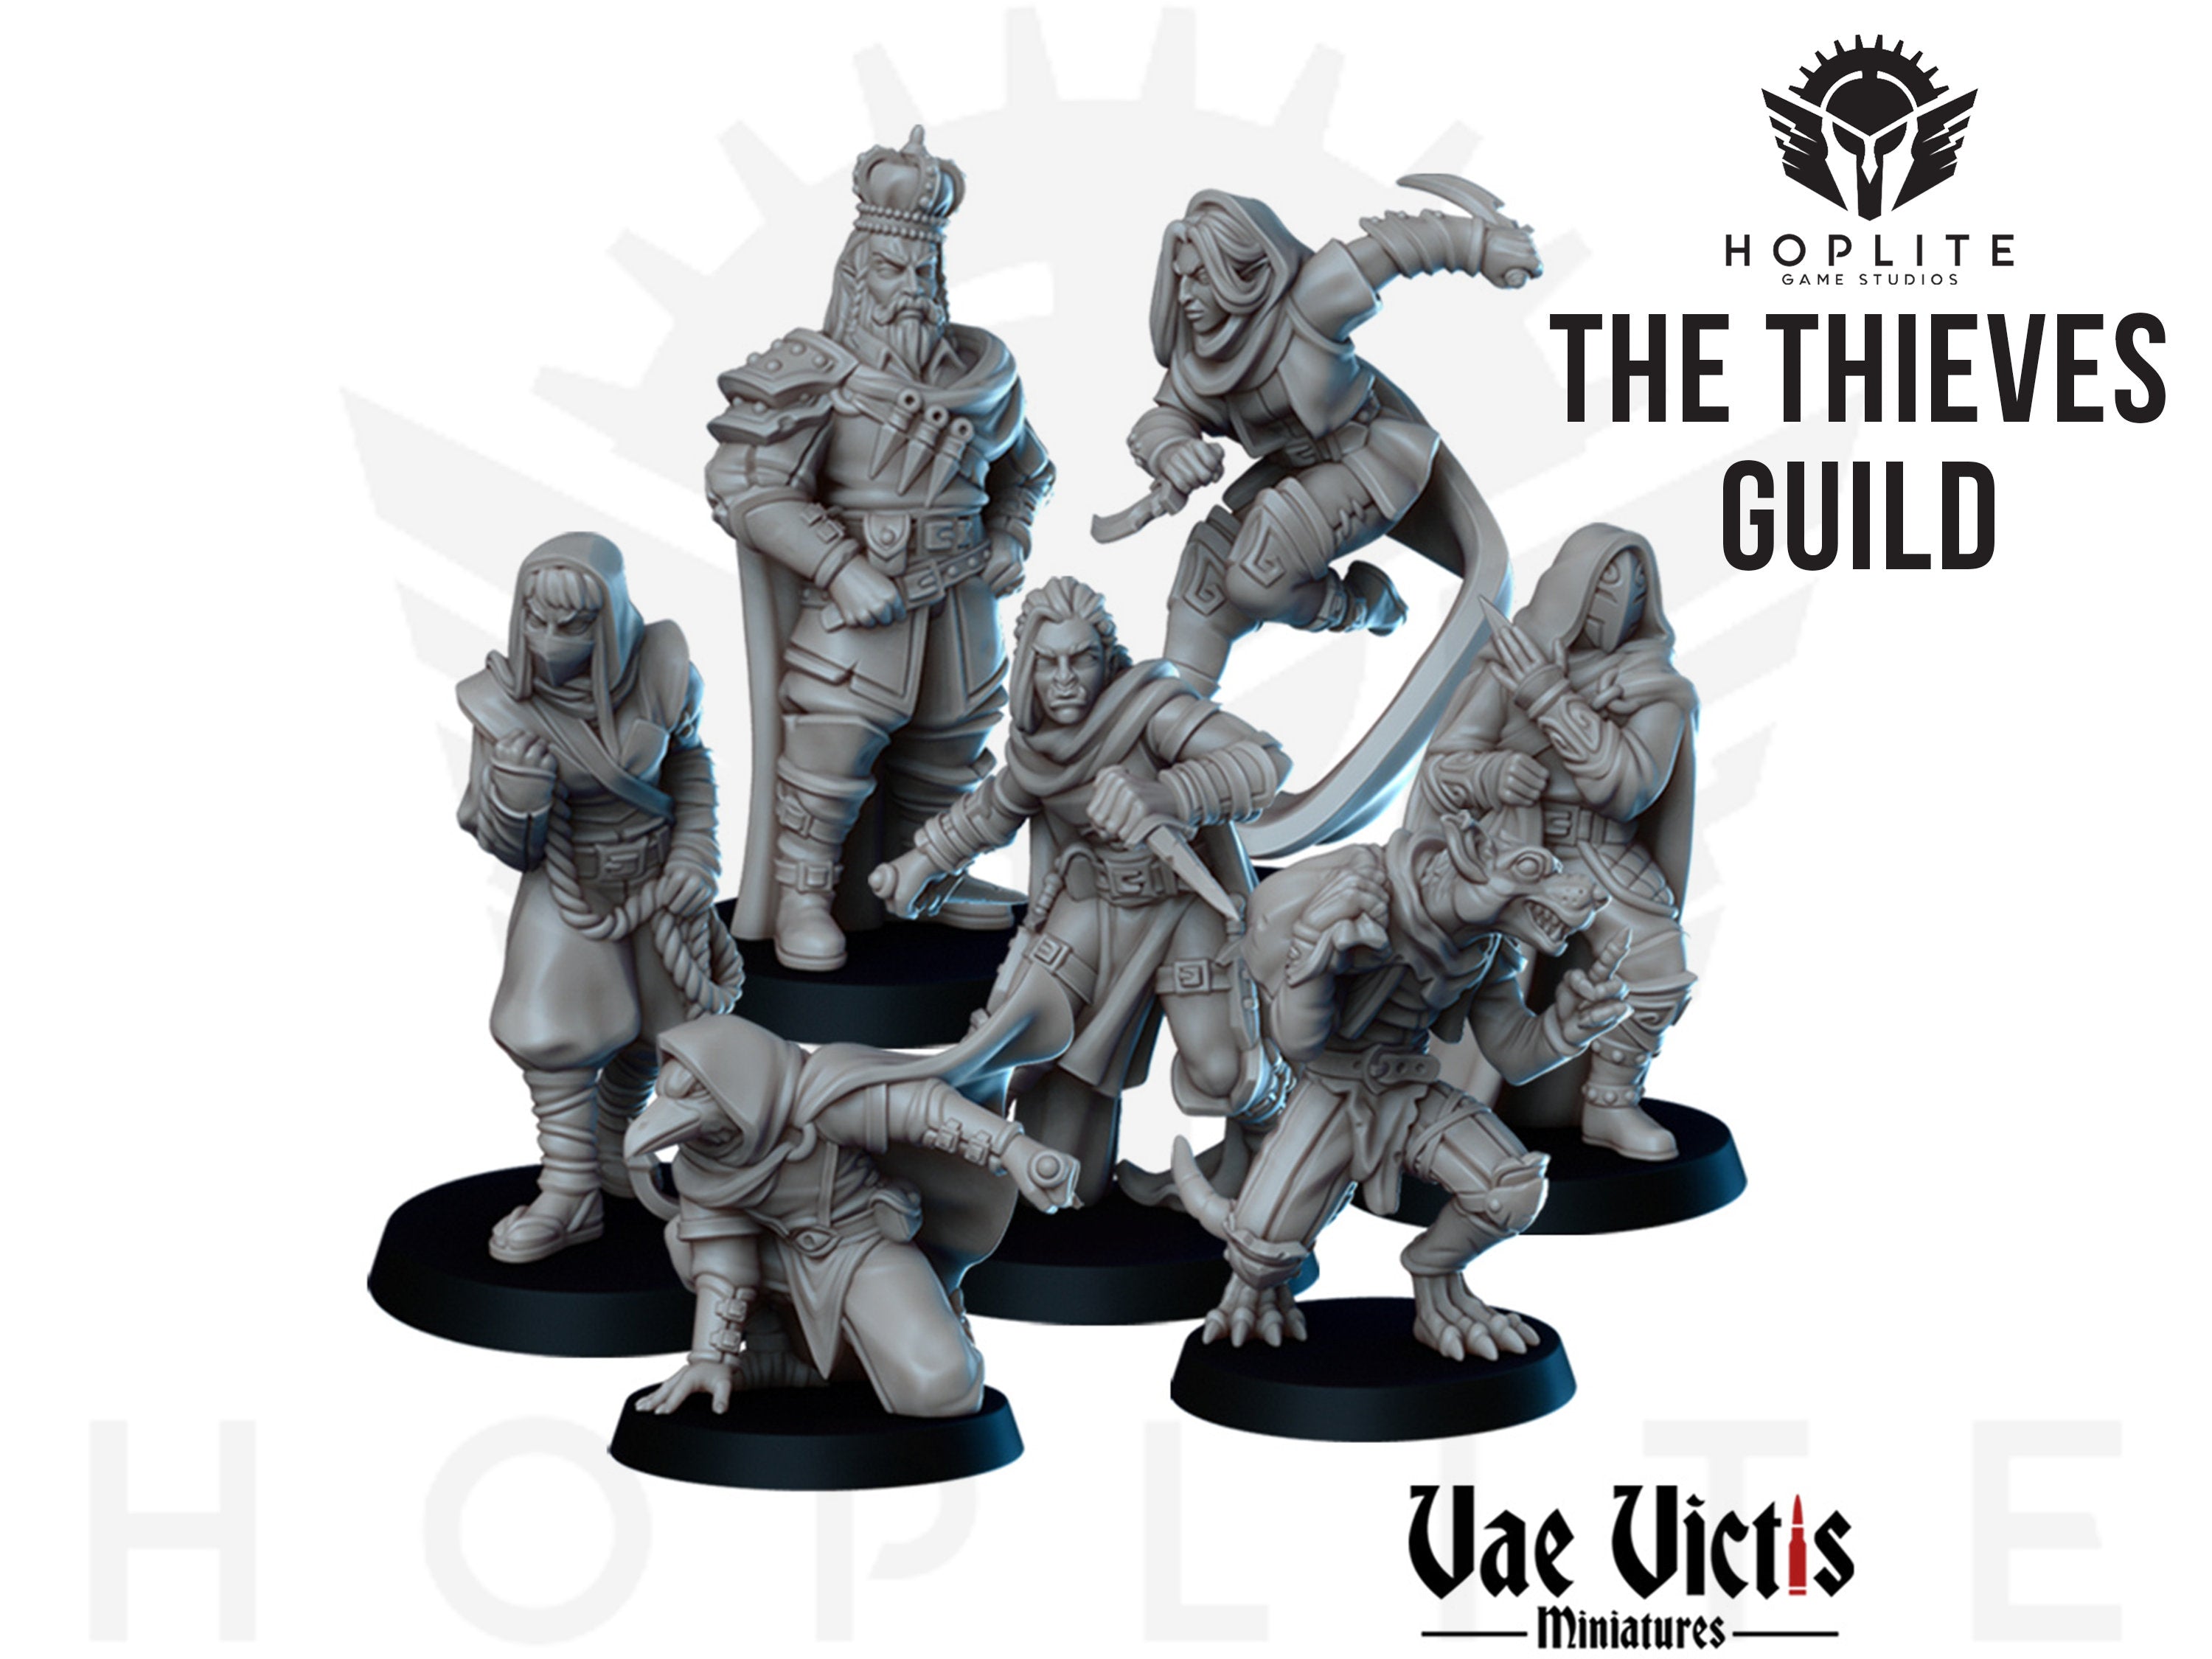 The Thieves Guild